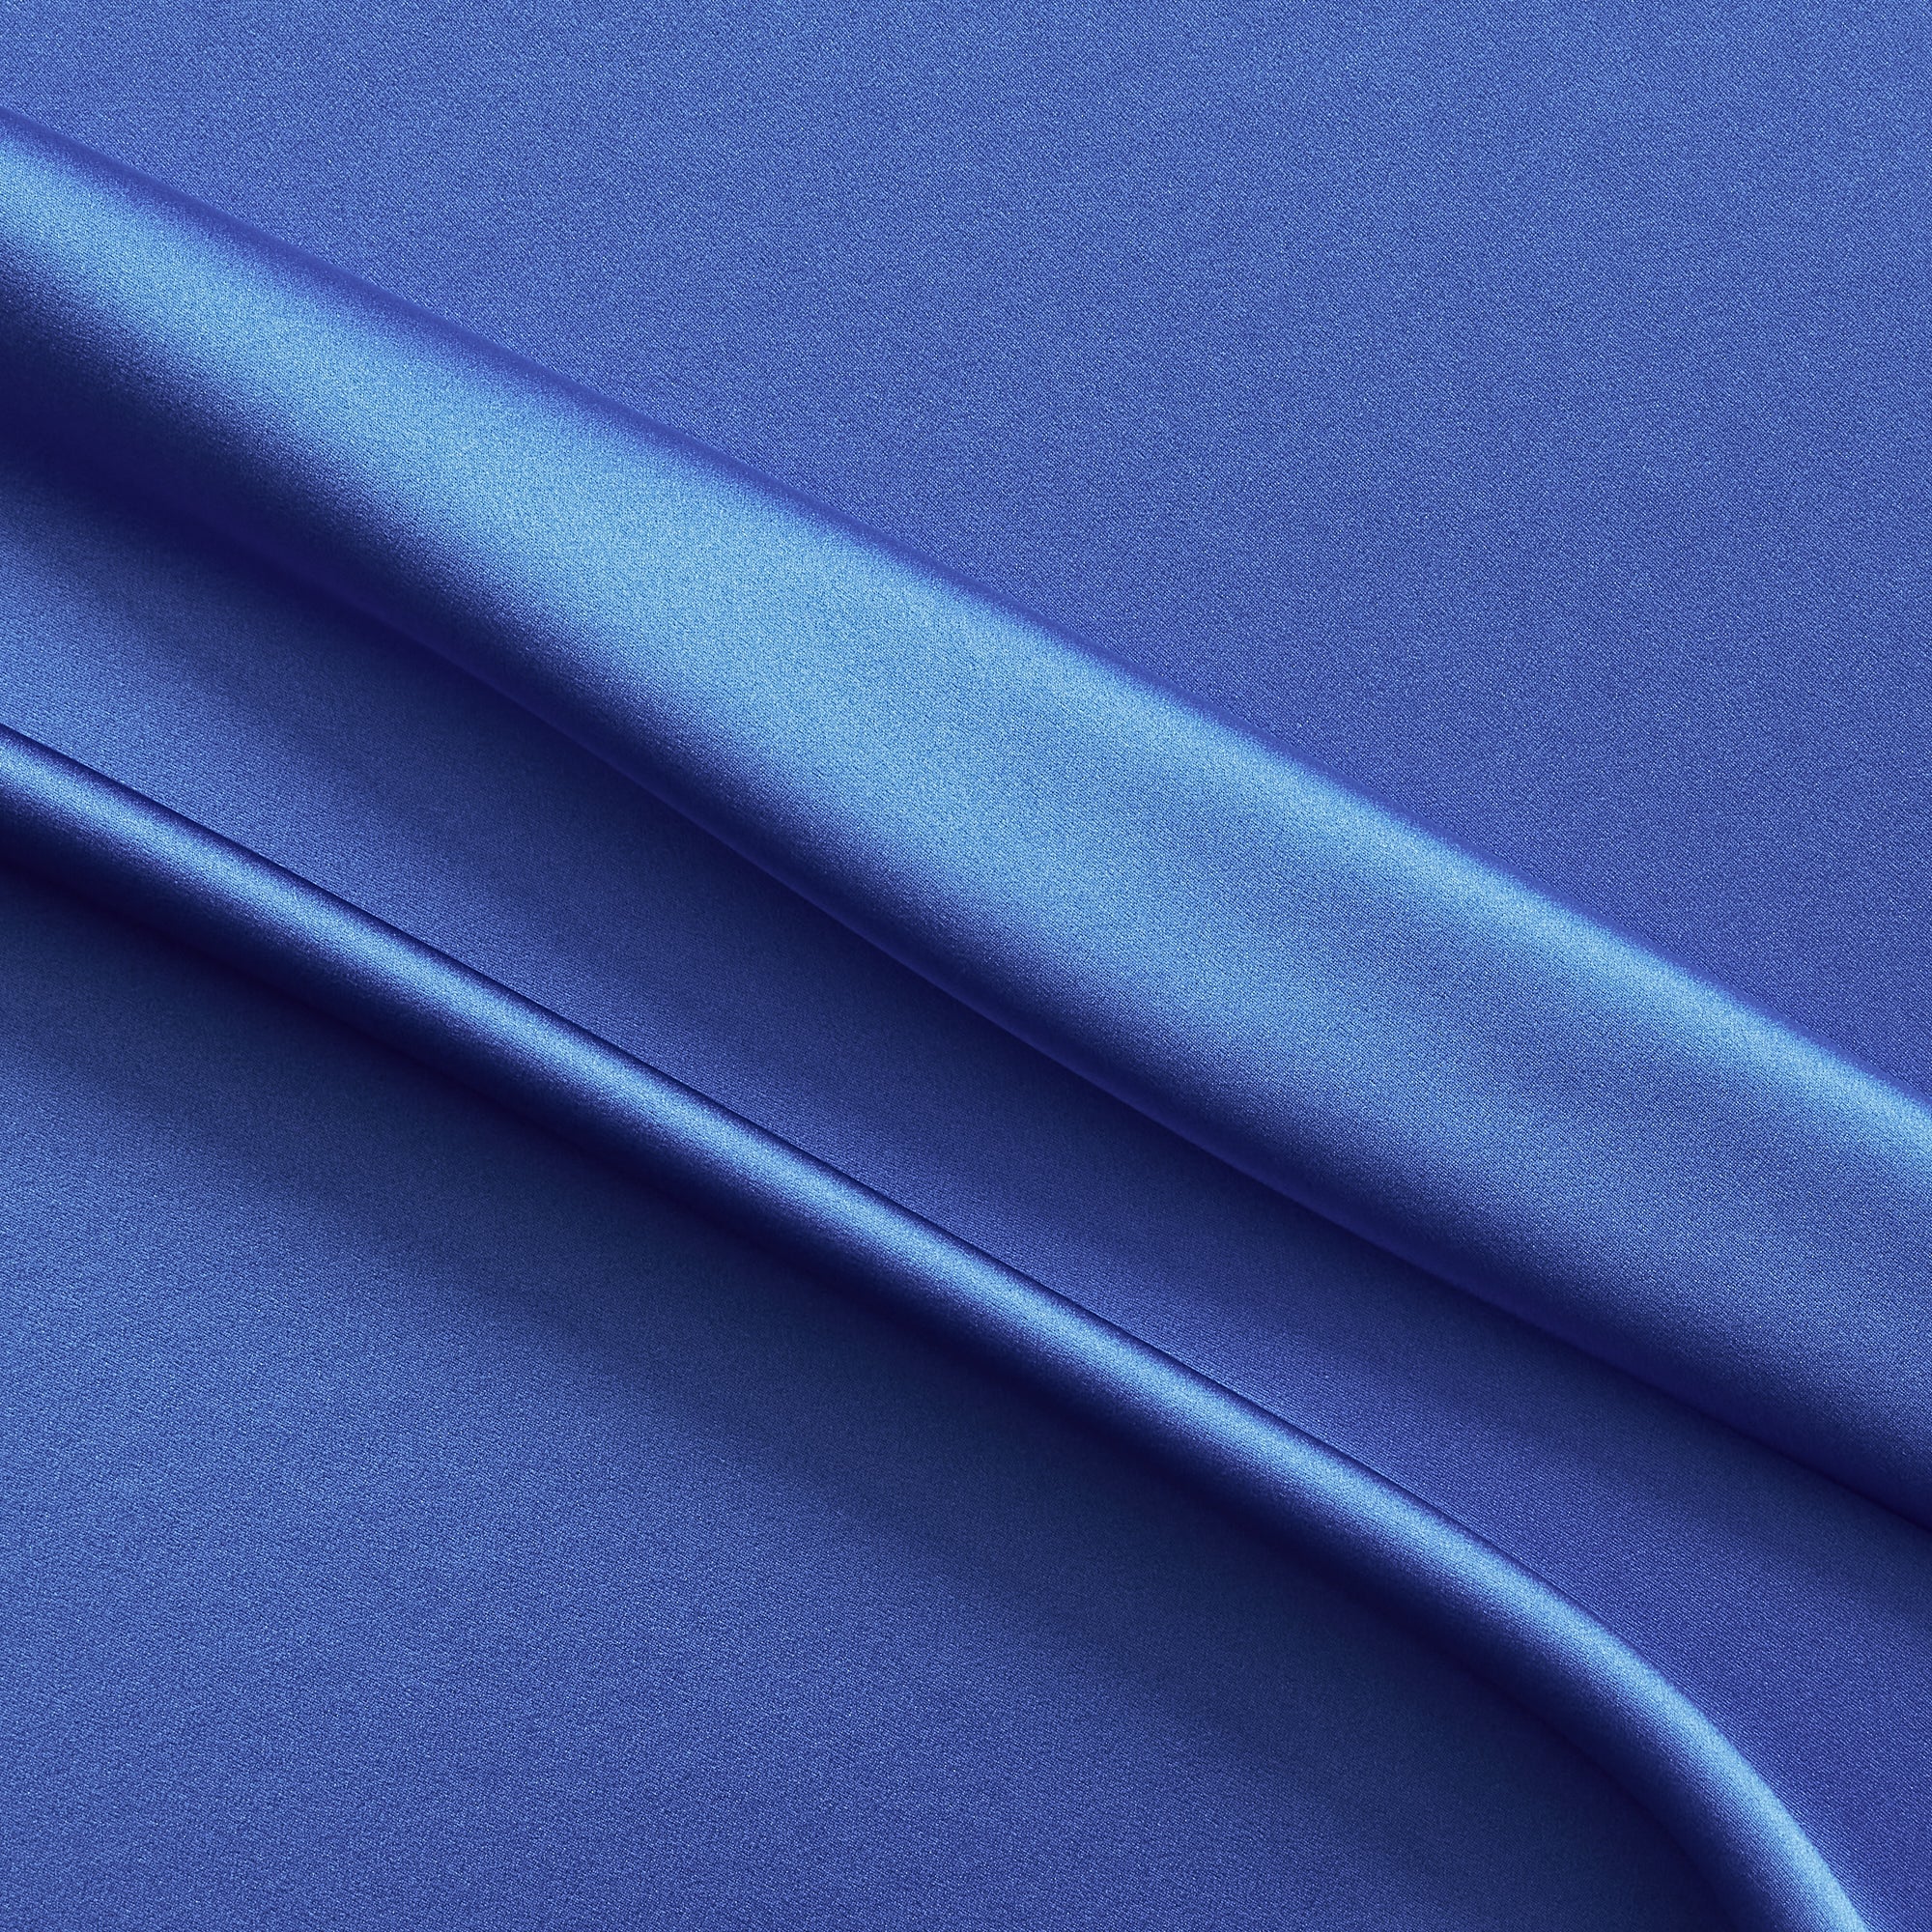 Silk Satin illustrating the Cobalt color version of a Soft Pure mulberry silk with natural sheen and fluid drape